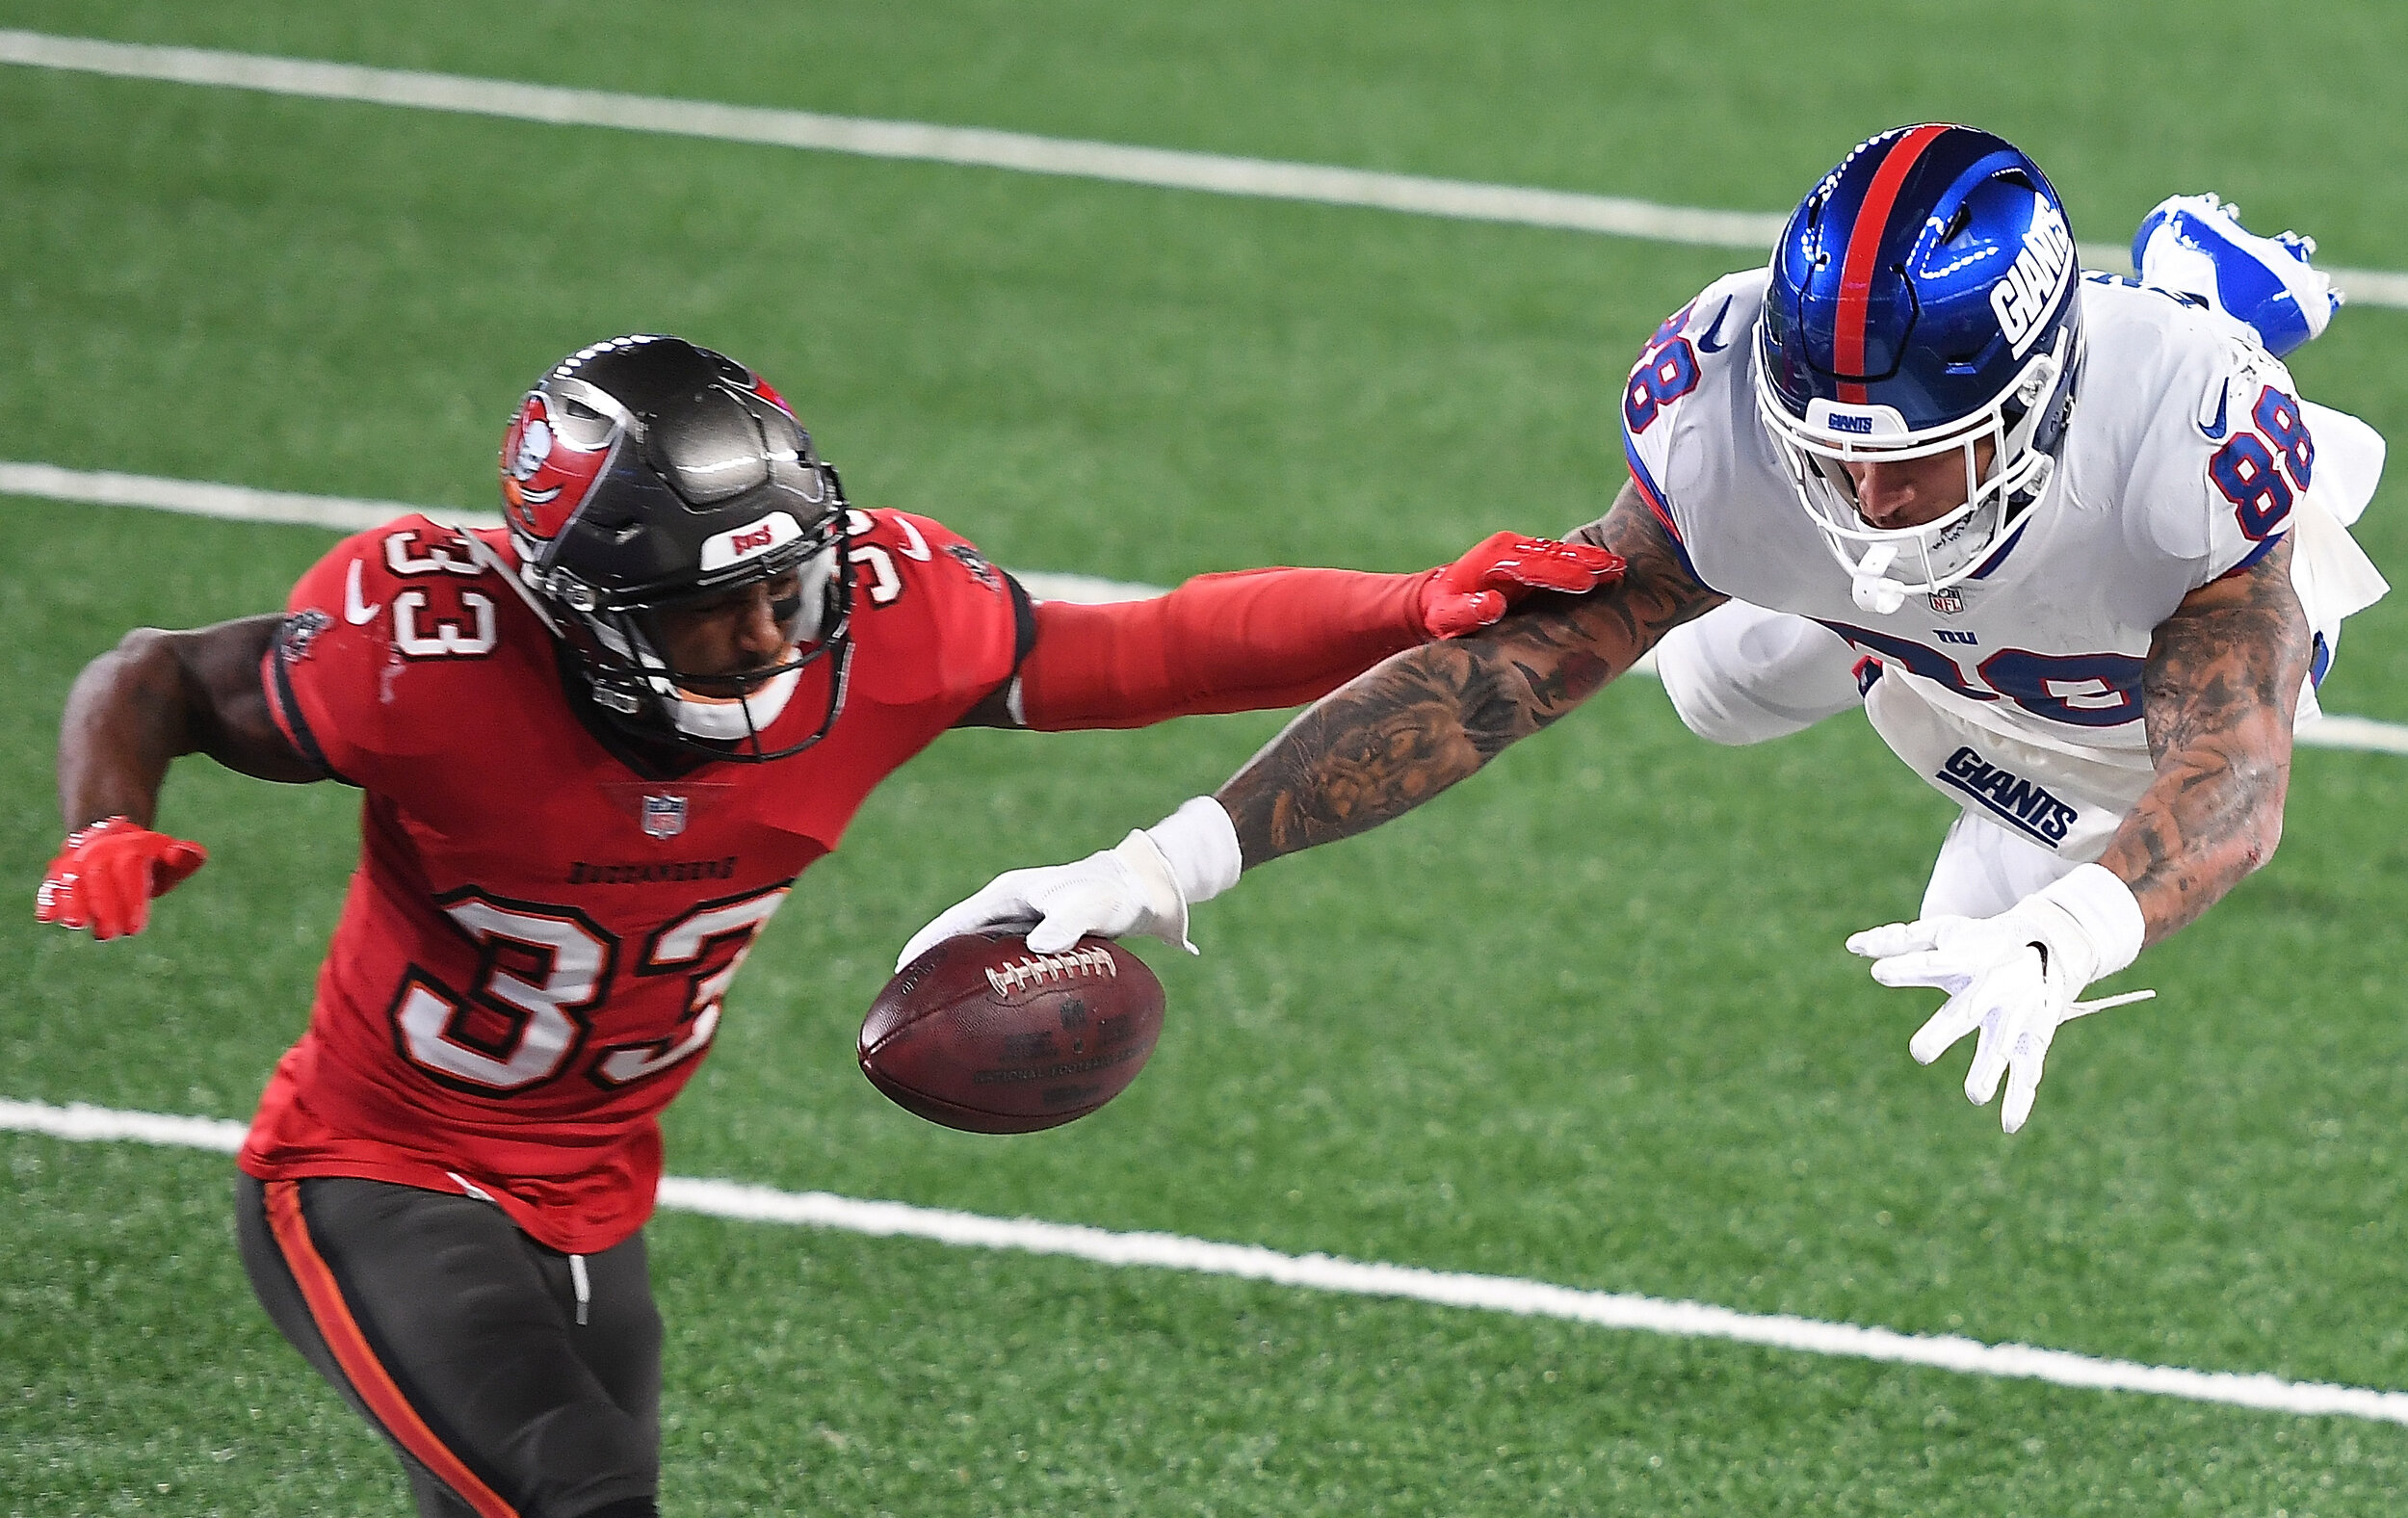  Evan Engram #88 of the New York Giants comes up short as he dives for the end zone against Jordan Whitehead #33 of the Tampa Bay Buccaneers in the first half at MetLife Stadium on November 02, 2020 in East Rutherford, New Jersey. 